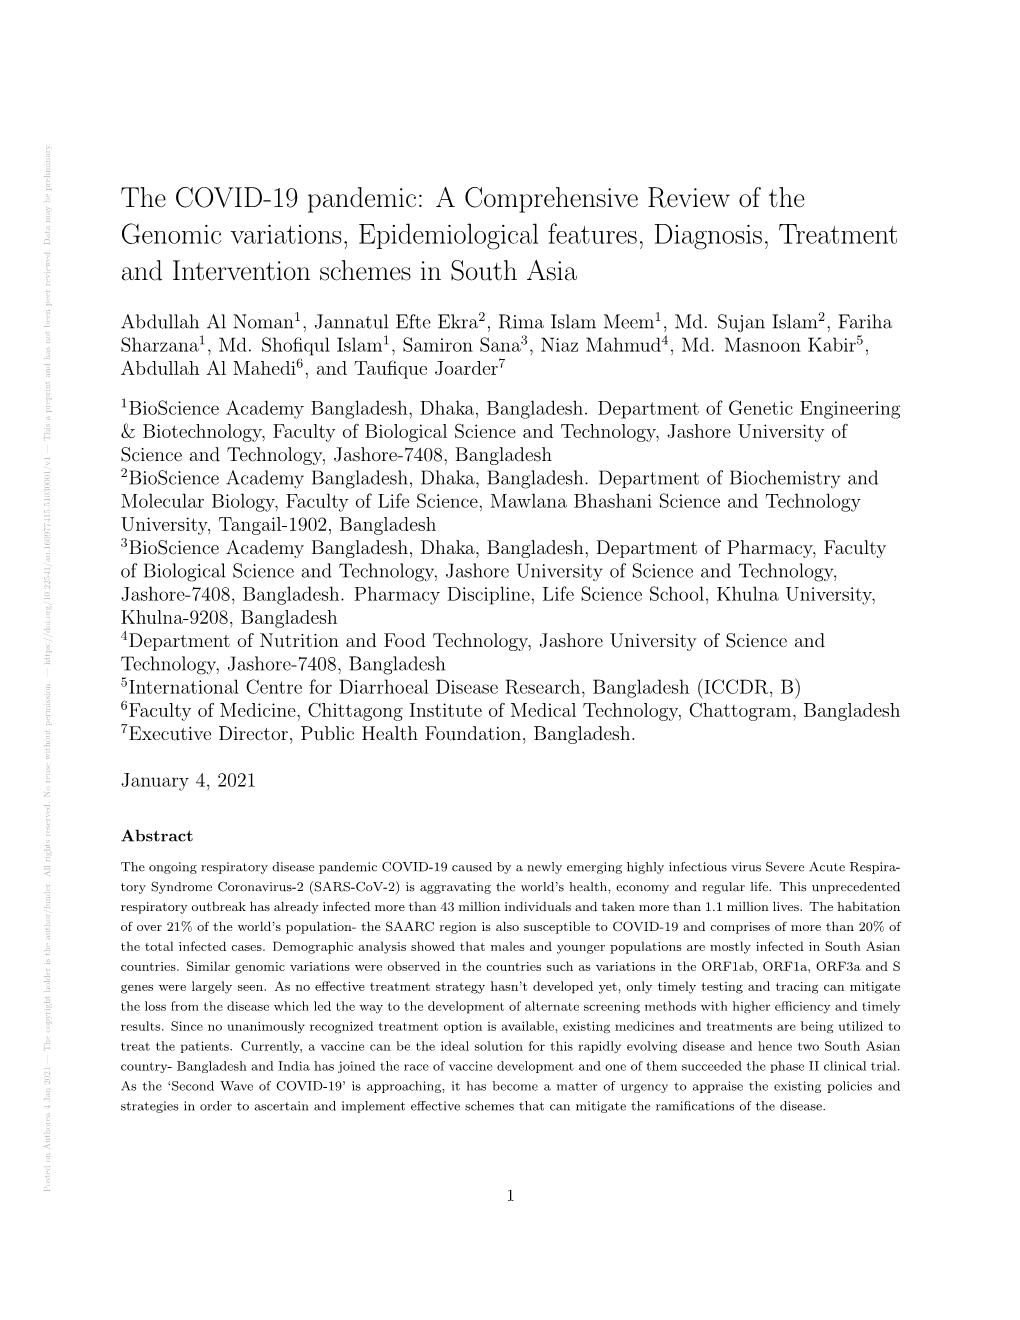 The COVID-19 Pandemic: a Comprehensive Review Of